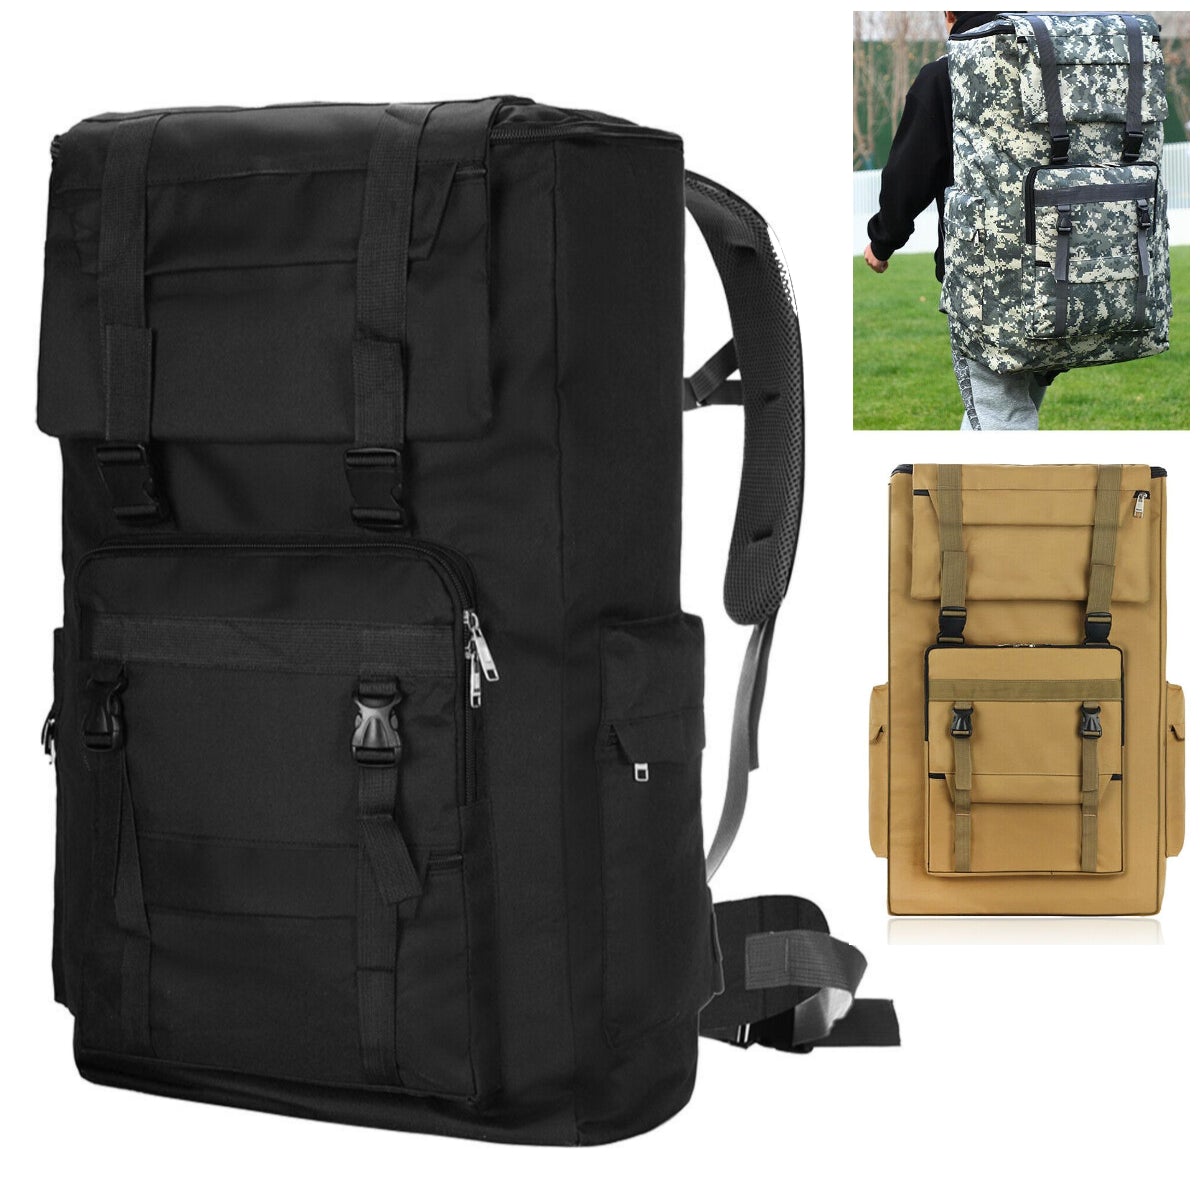 MROYALE™ 120L XL Tactical Outdoor Hiking Backpack | Supersize